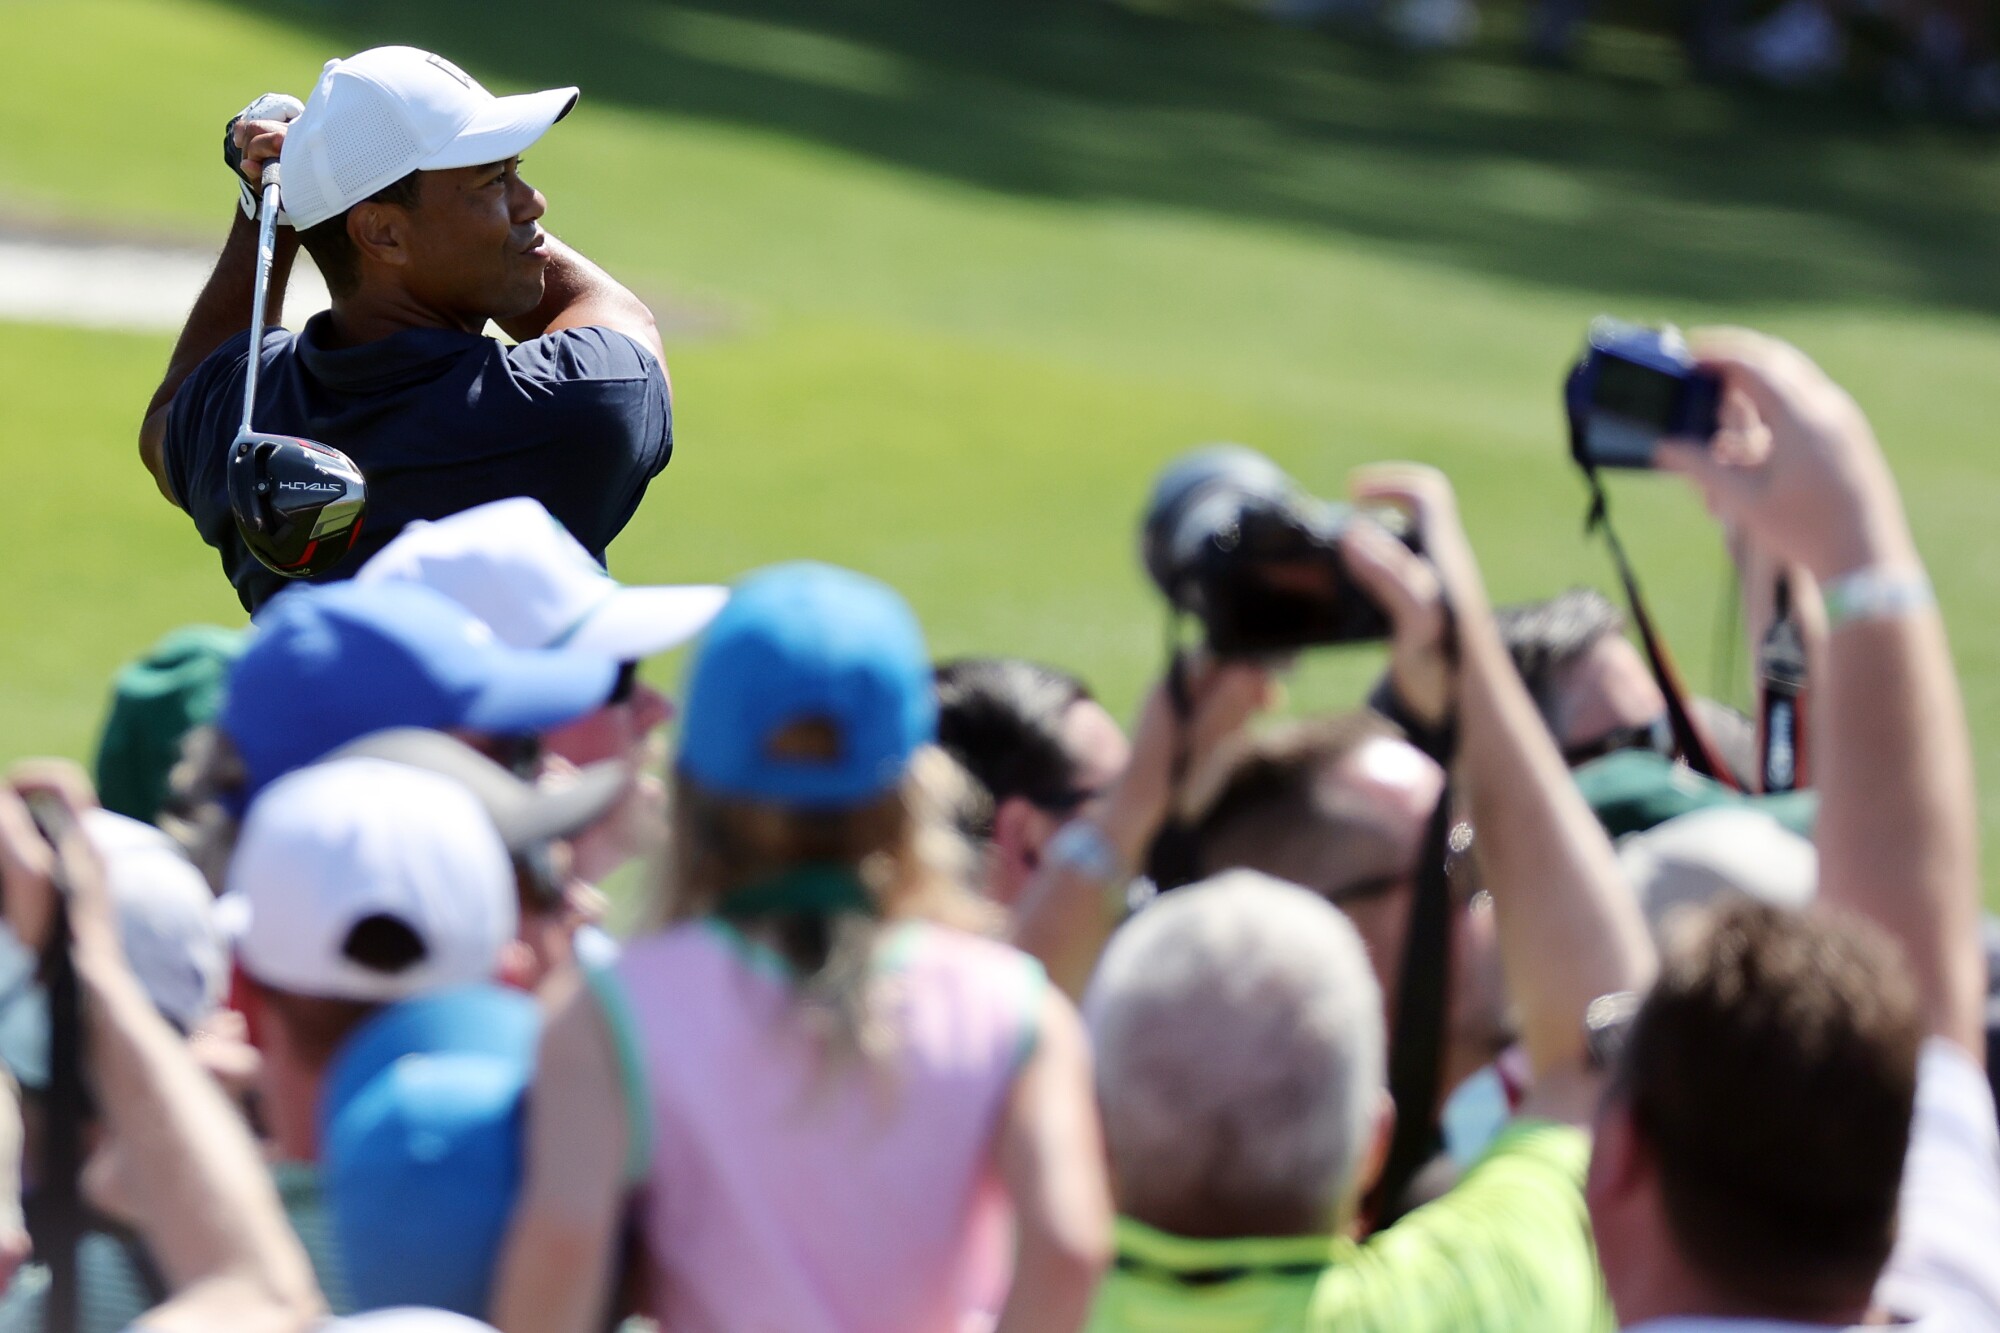 People take pictures as Tiger Woods swings a club